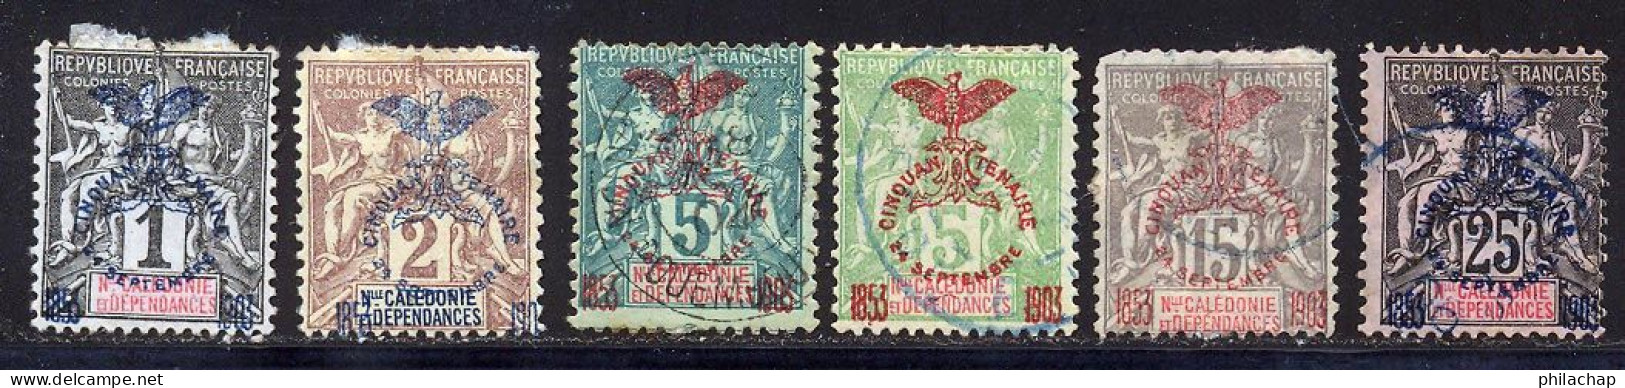 Nouvelle-Caledonie 1903 Yvert 67 - 68 - 70 - 71 - 73 - 75 (o) B Oblitere(s) - Used Stamps